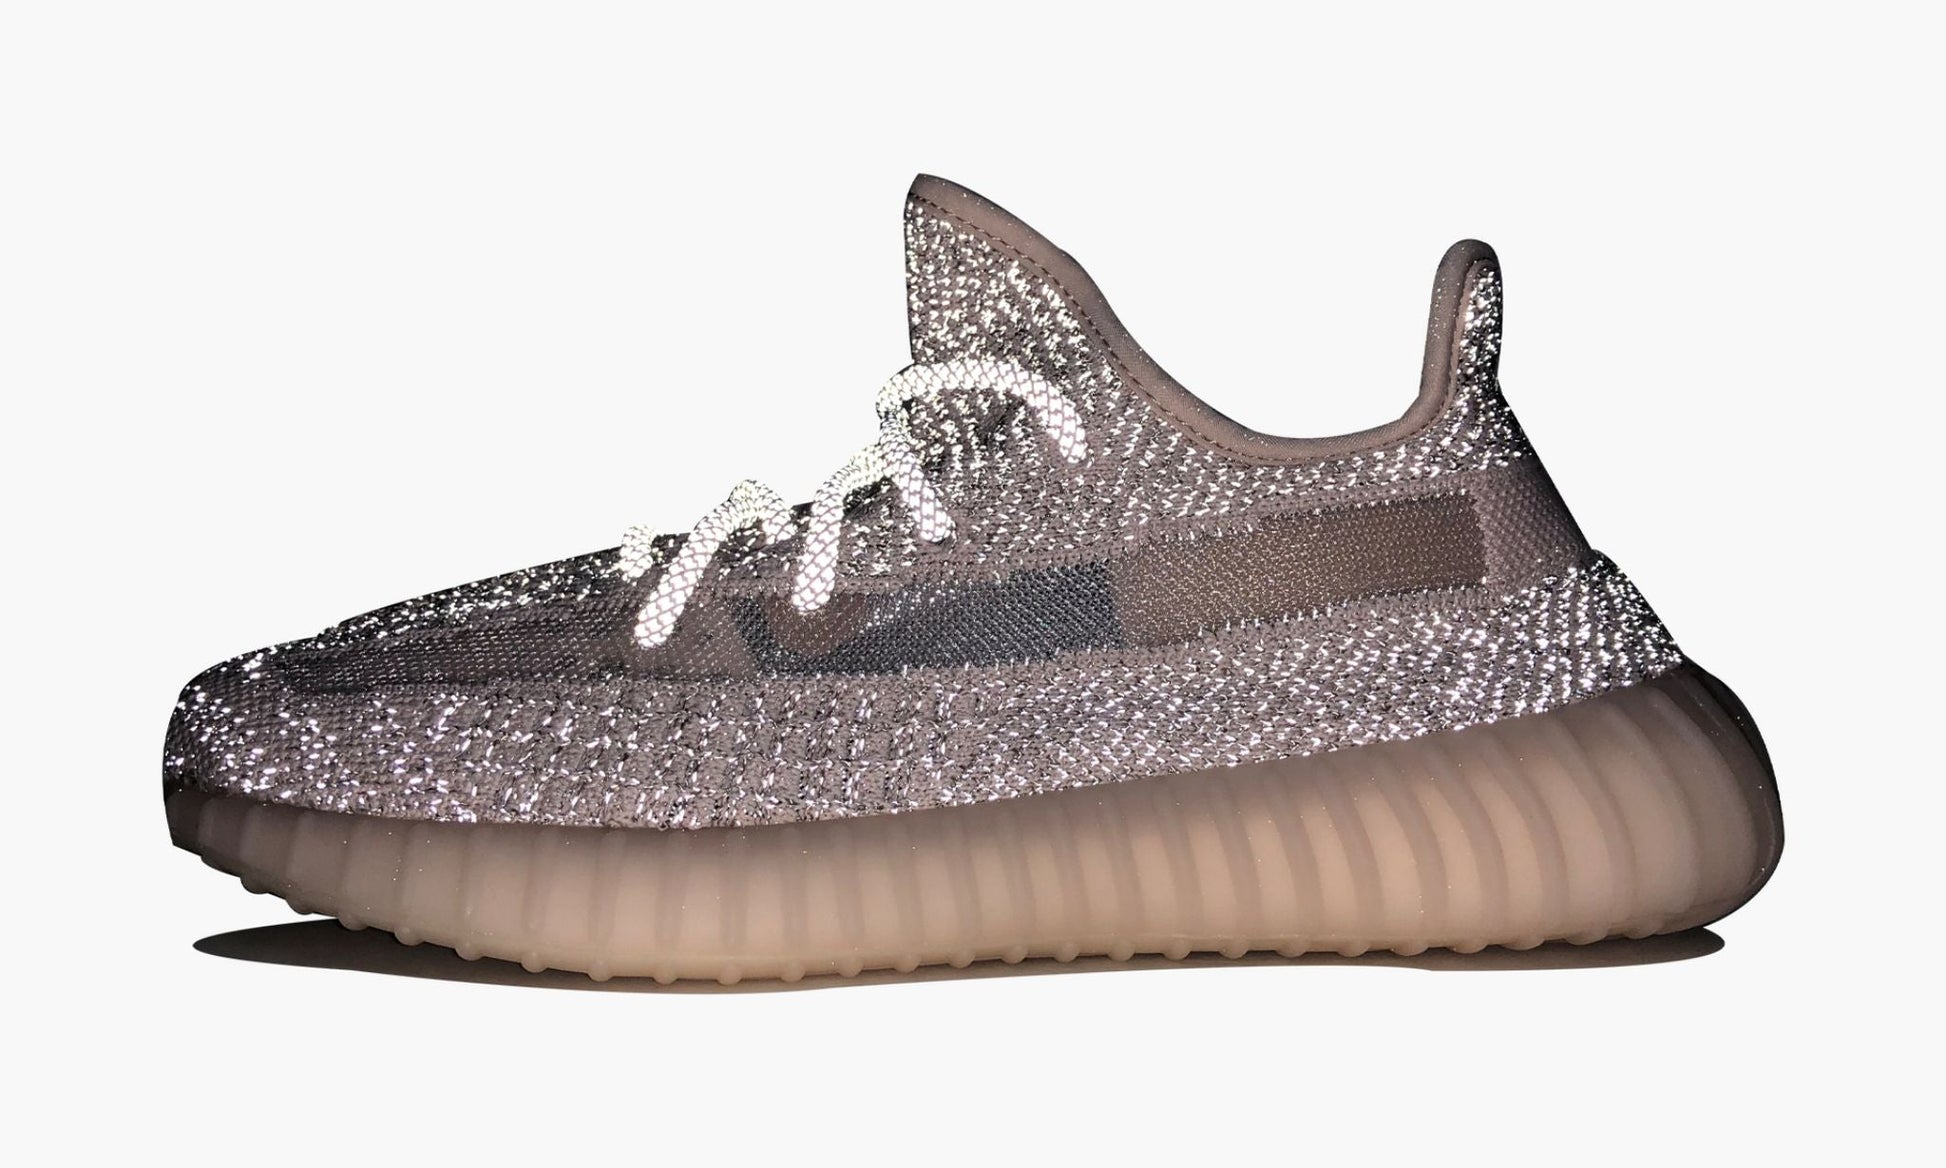 Yeezy Boost 350 V2 Reflective "Synth"